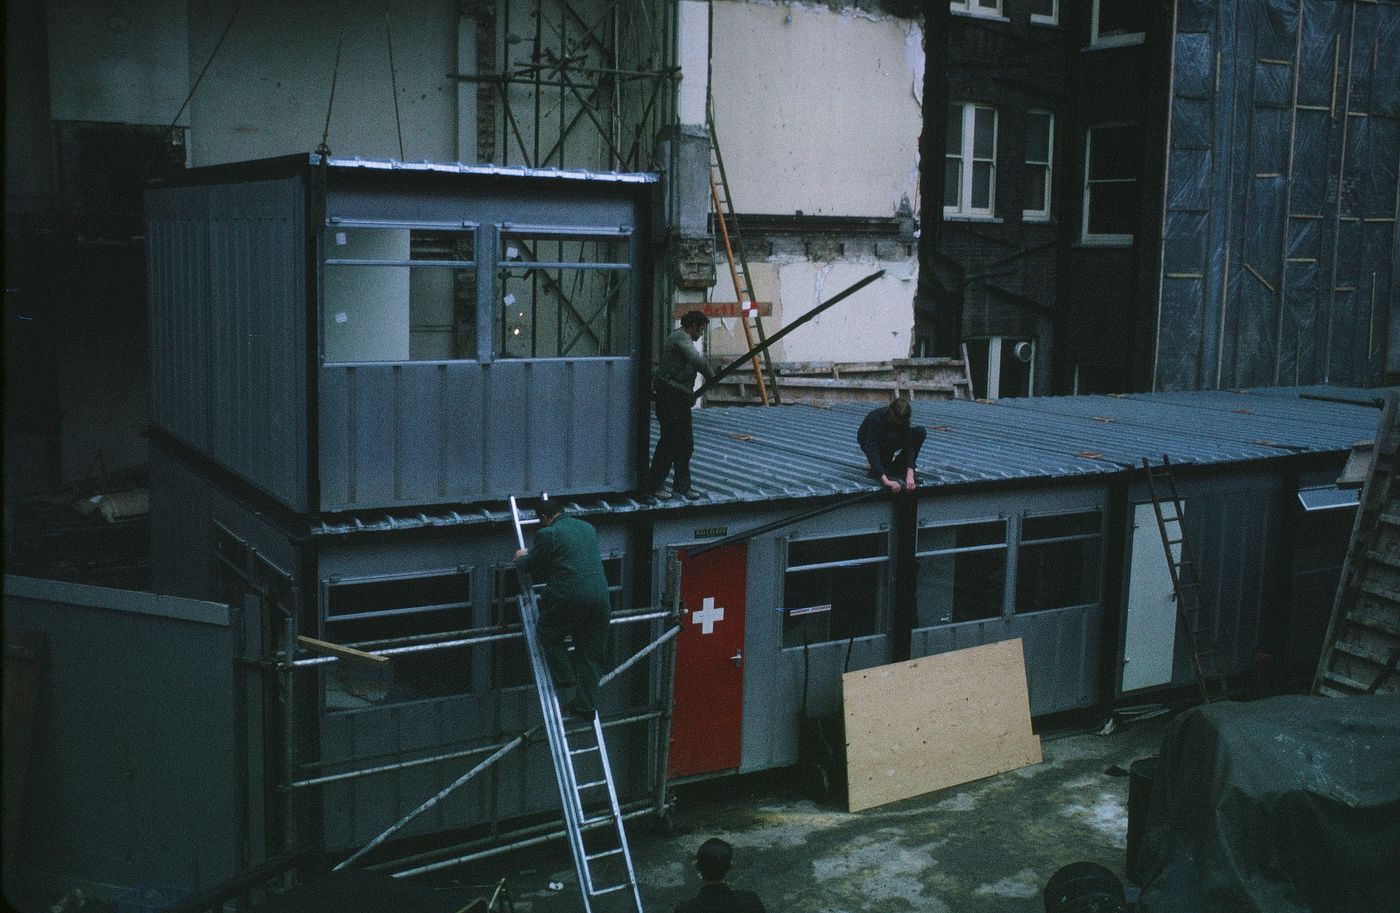 McAppy: view of workers assembling portable enclosures, including a First Aid station, at the Angel Court site